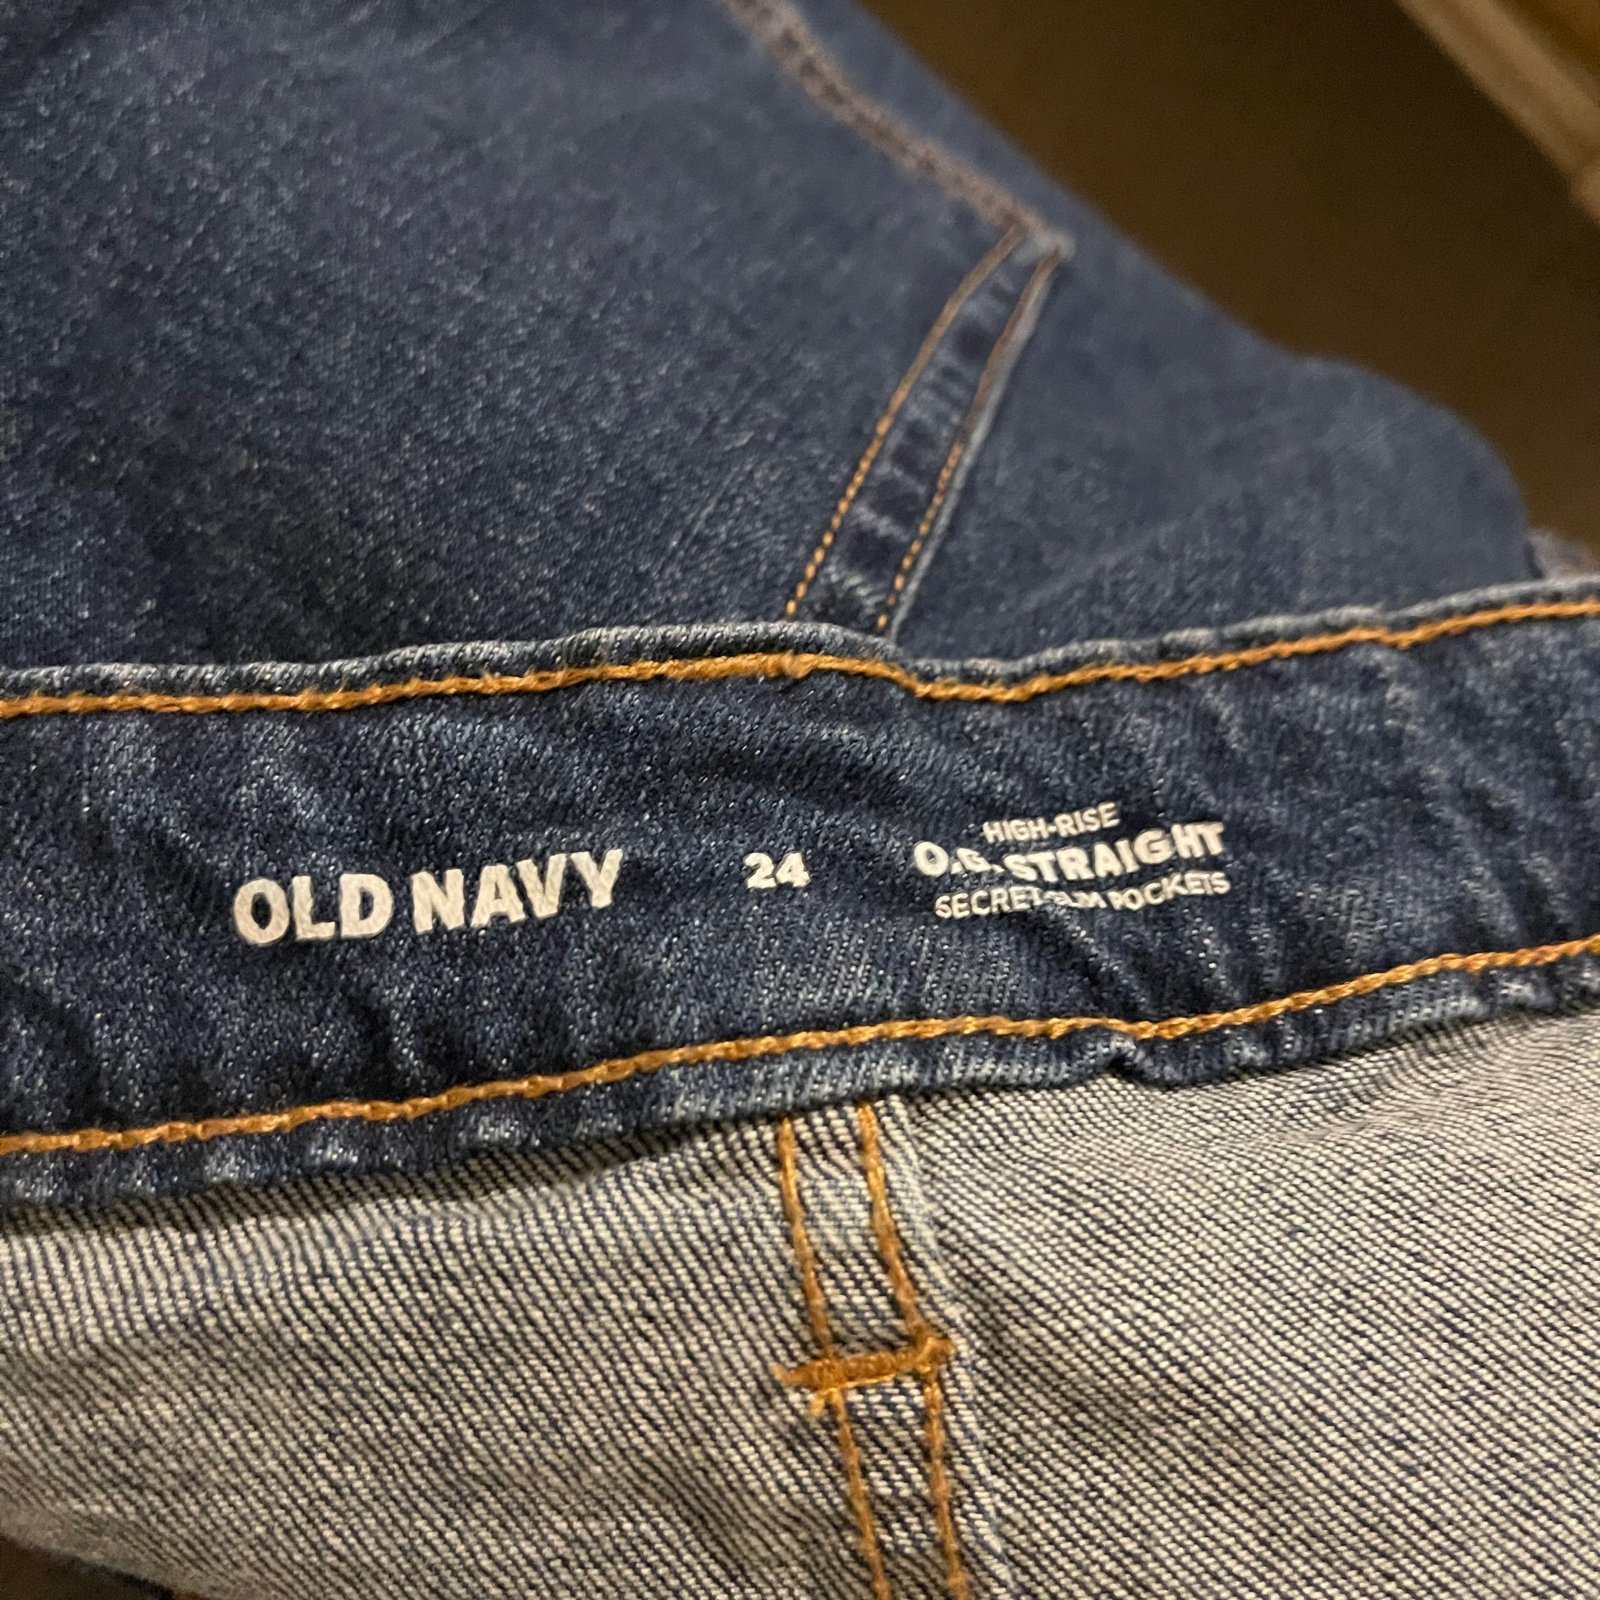 Buy Old Navy High Rise OG Straight Jeans Women´s Plus Size 24 pkGYA5Bkx just buy it